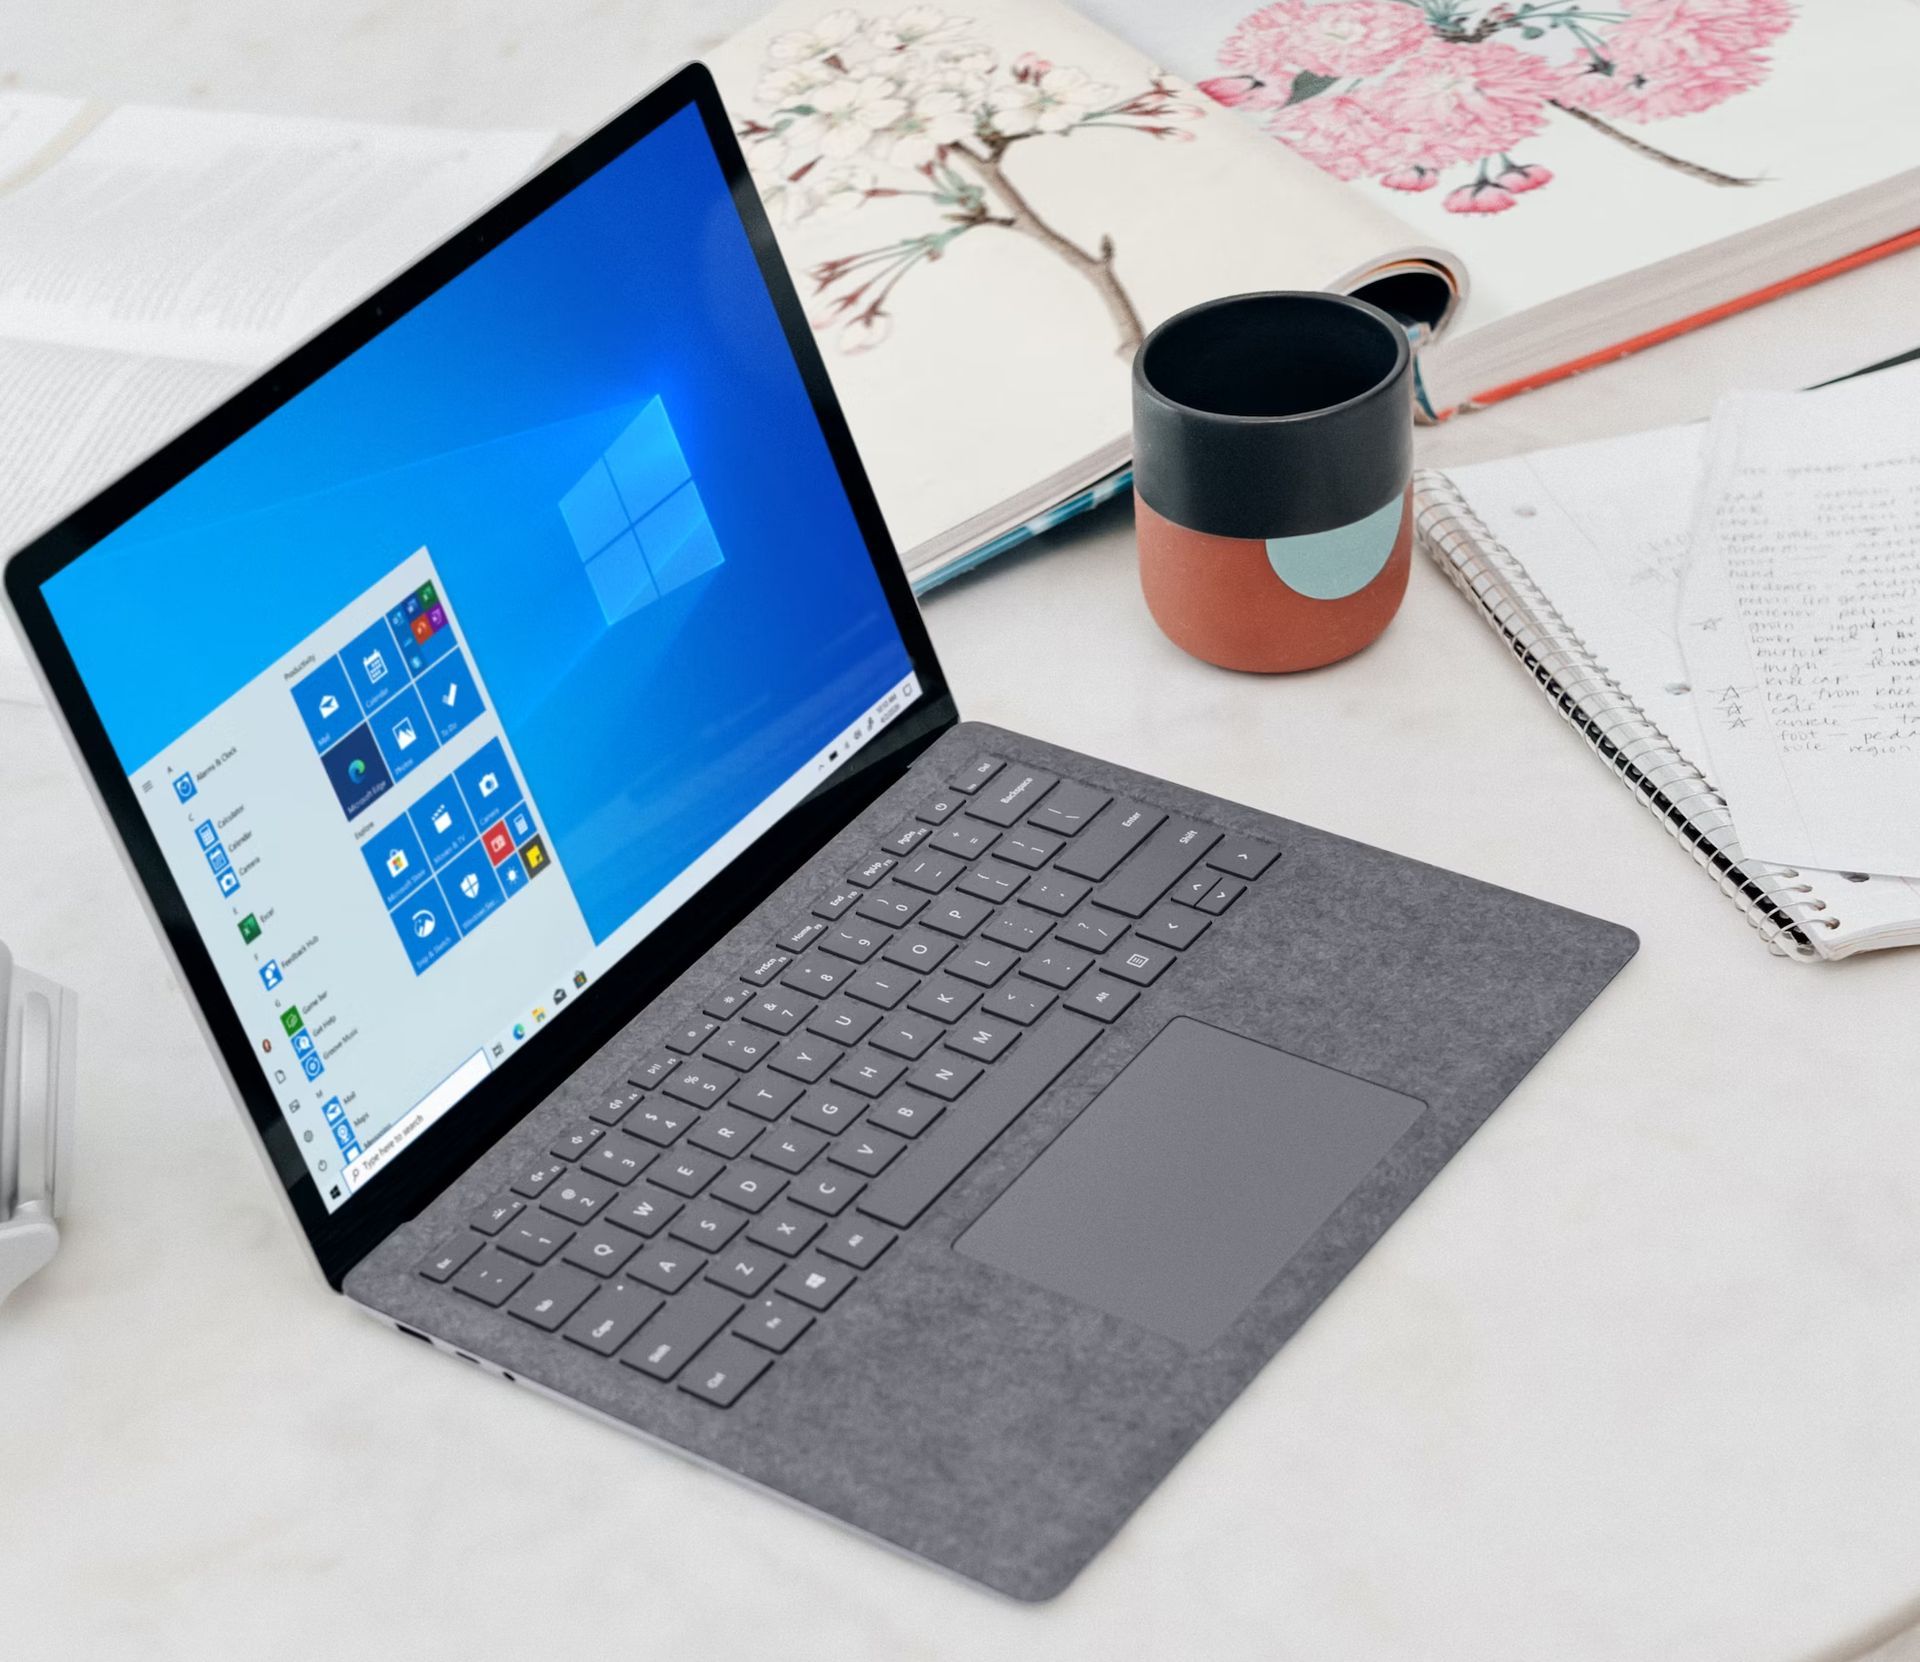 Microsoft special event to reveal Surface and AI upgrades